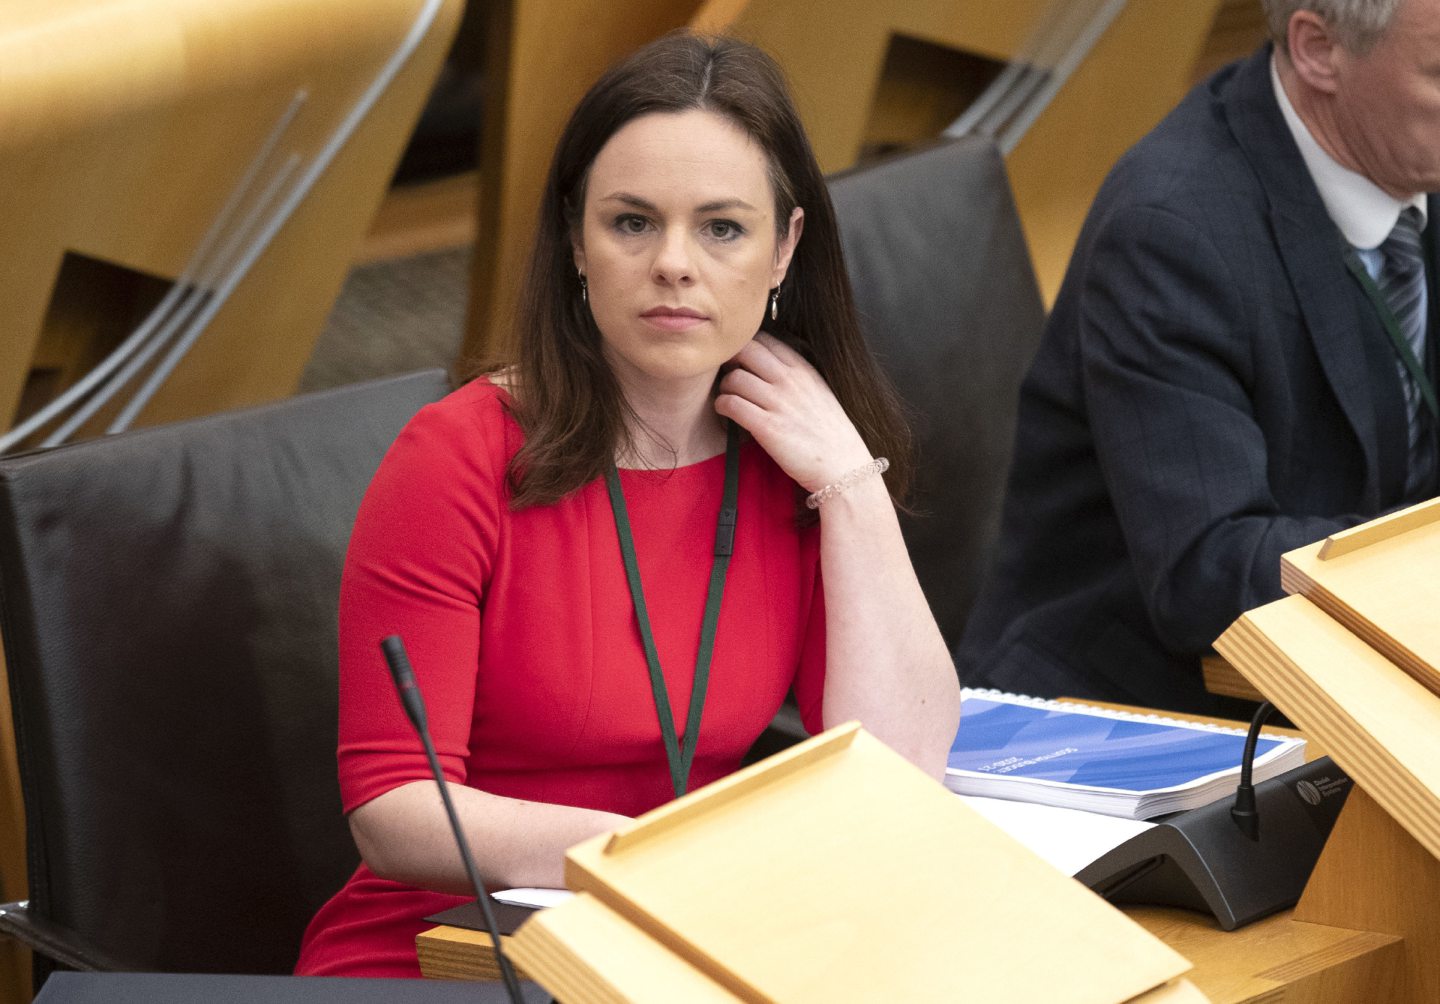 Public finance minister Kate Forbes in the main chamber before unveiling the Scottish Government's spending pledges for the next financial year at the Scottish Parliament.